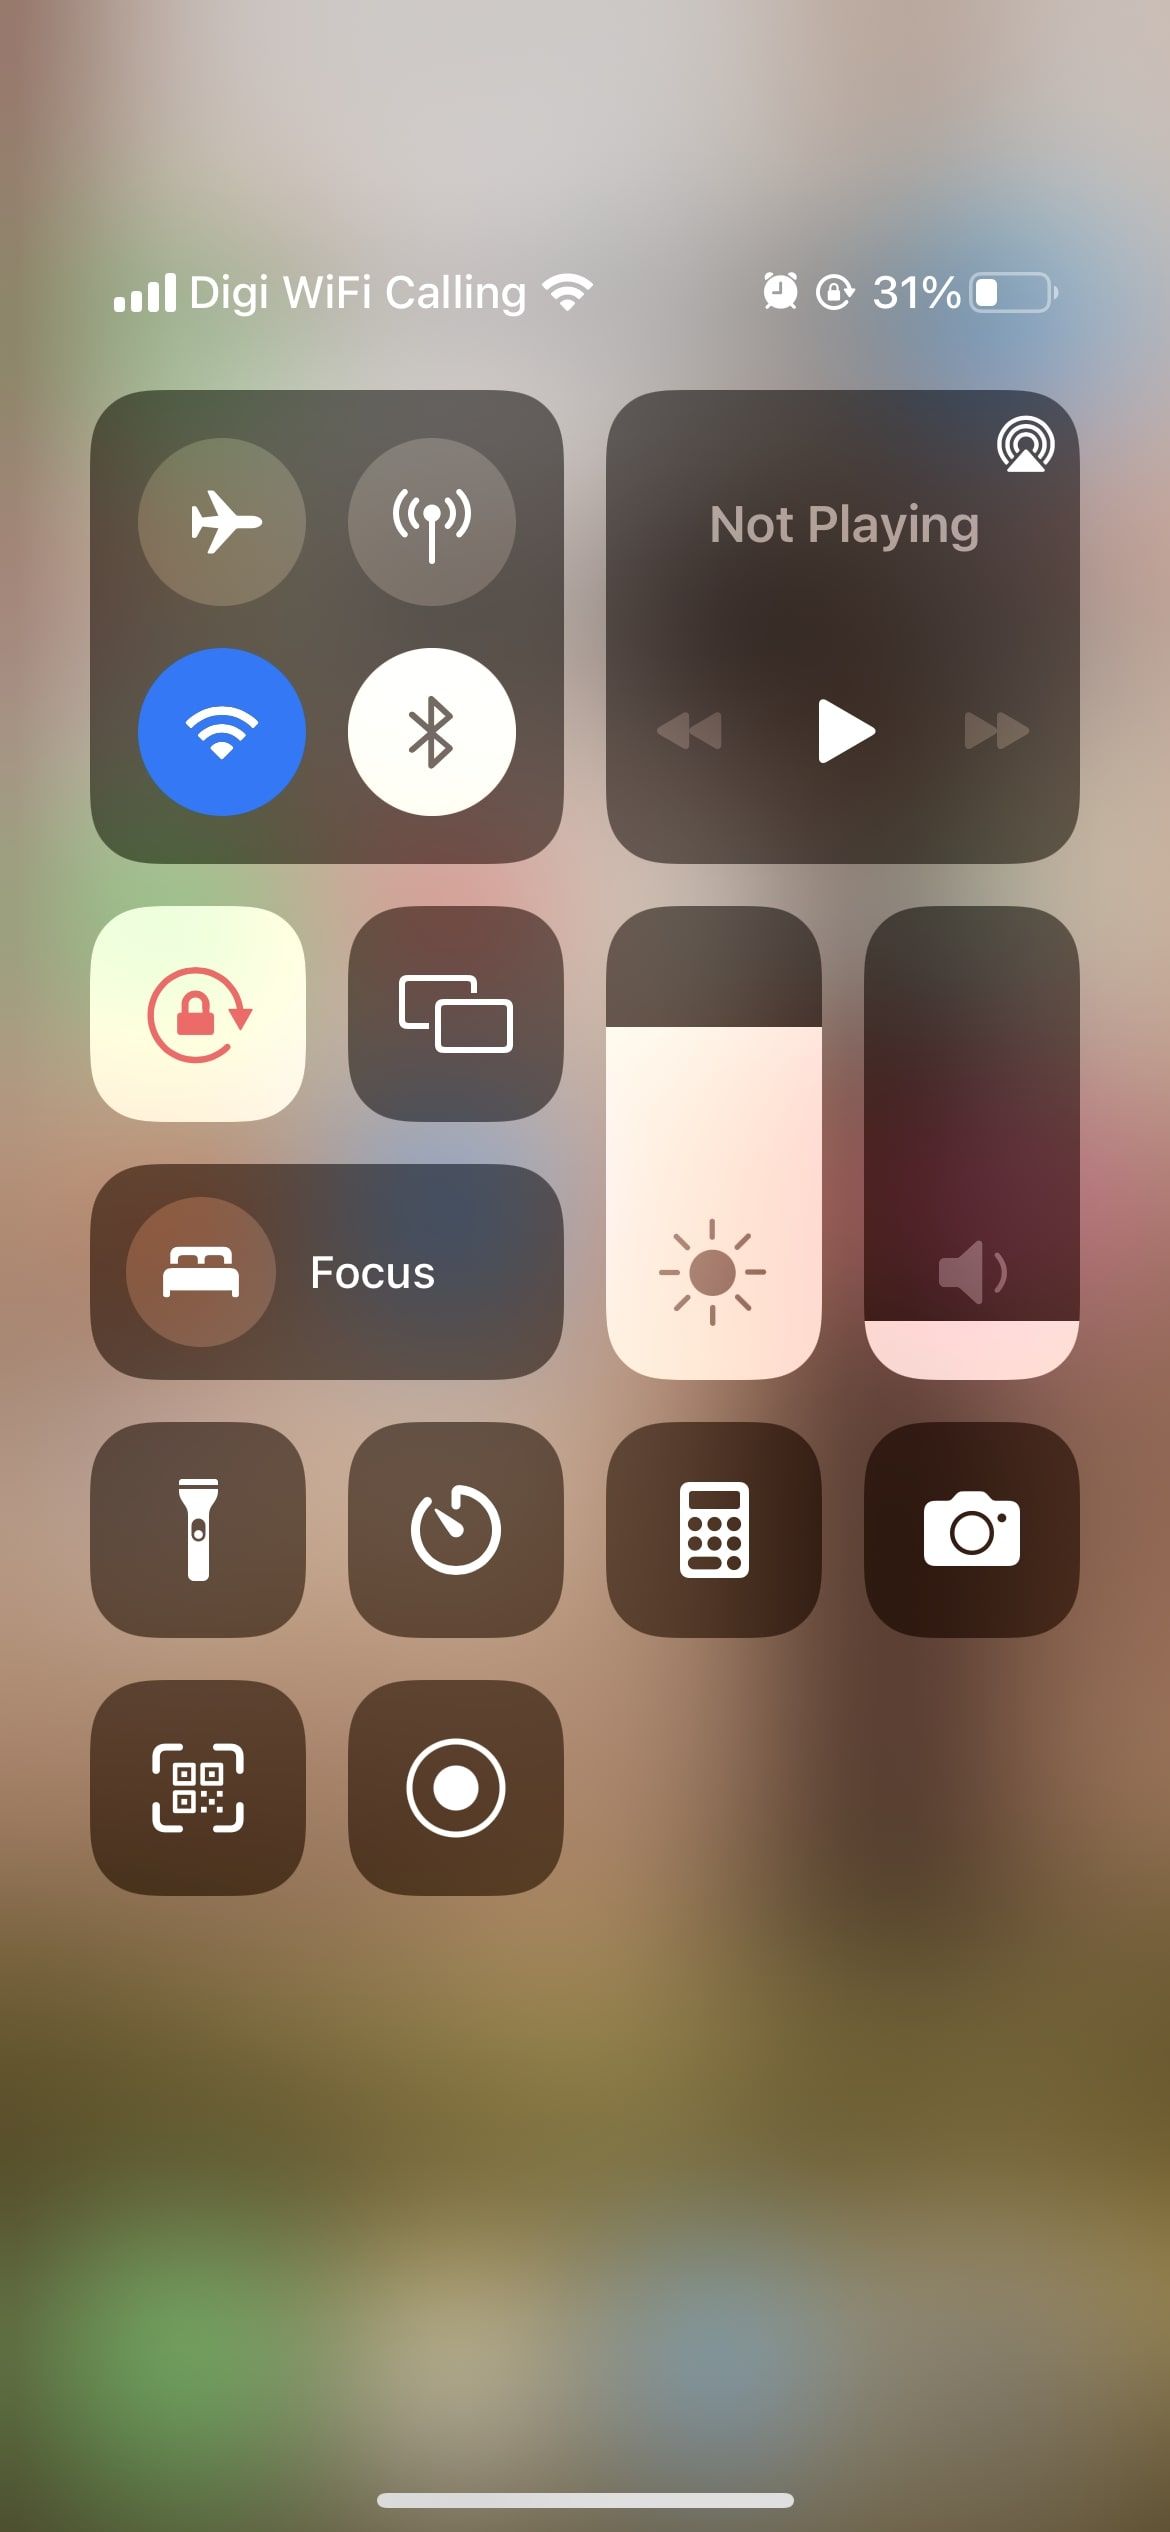 sleep mode turned off in iphone control center